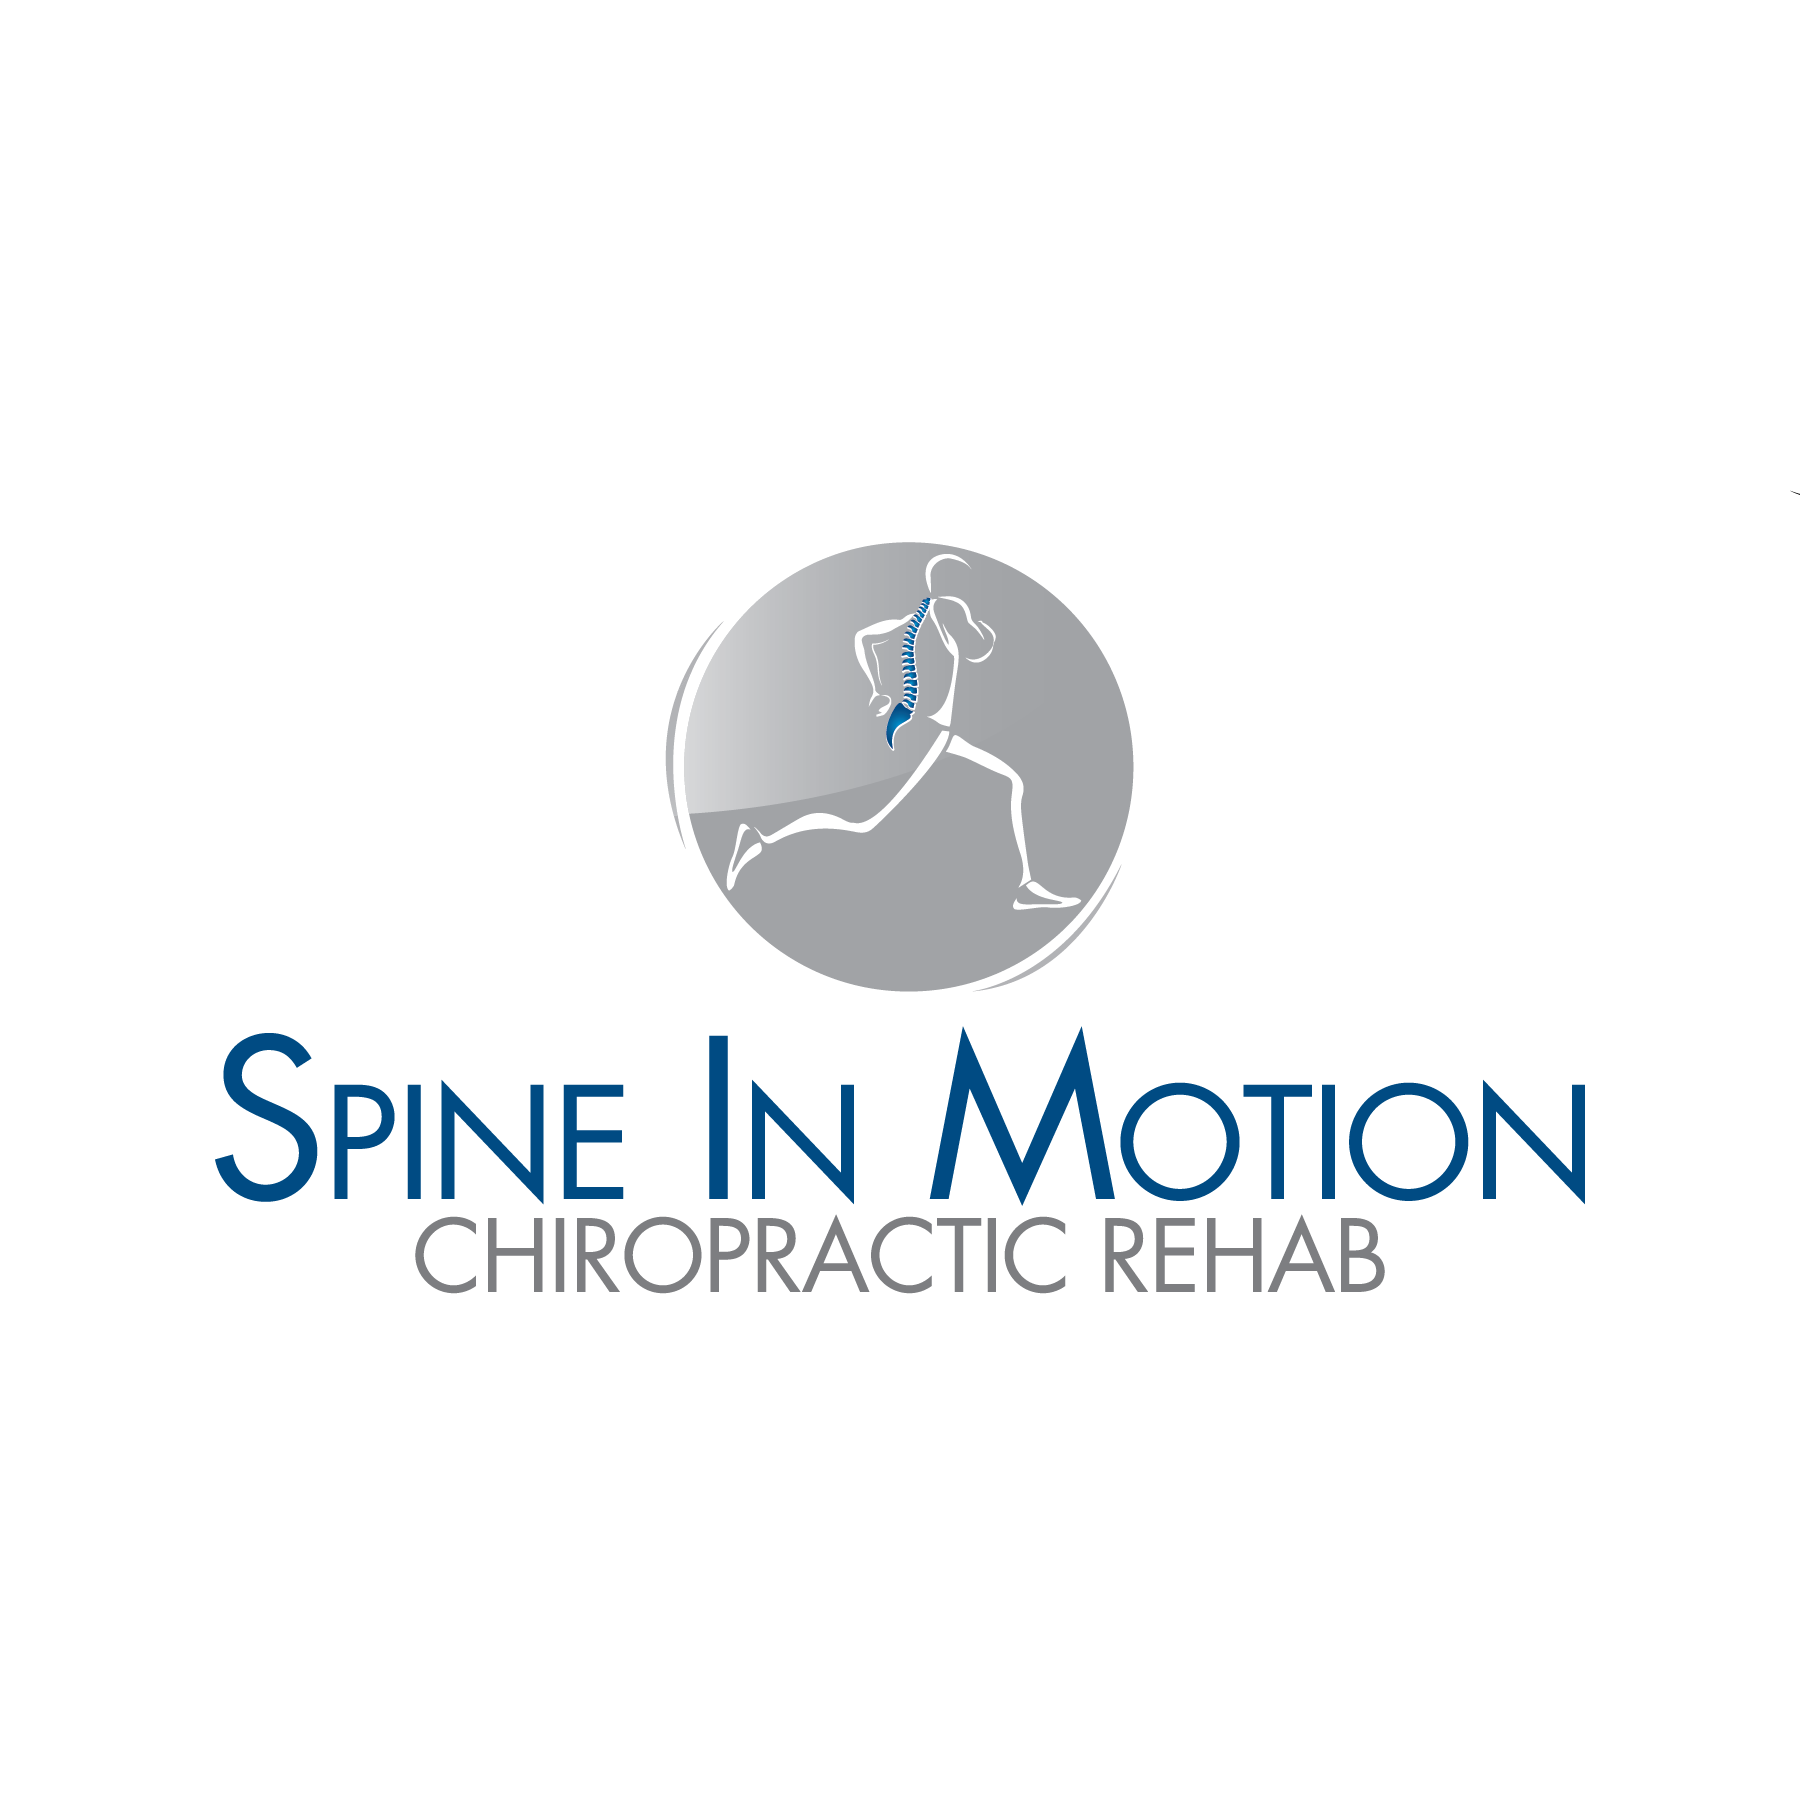 Spine In Motion Chiropractic Rehab Logo